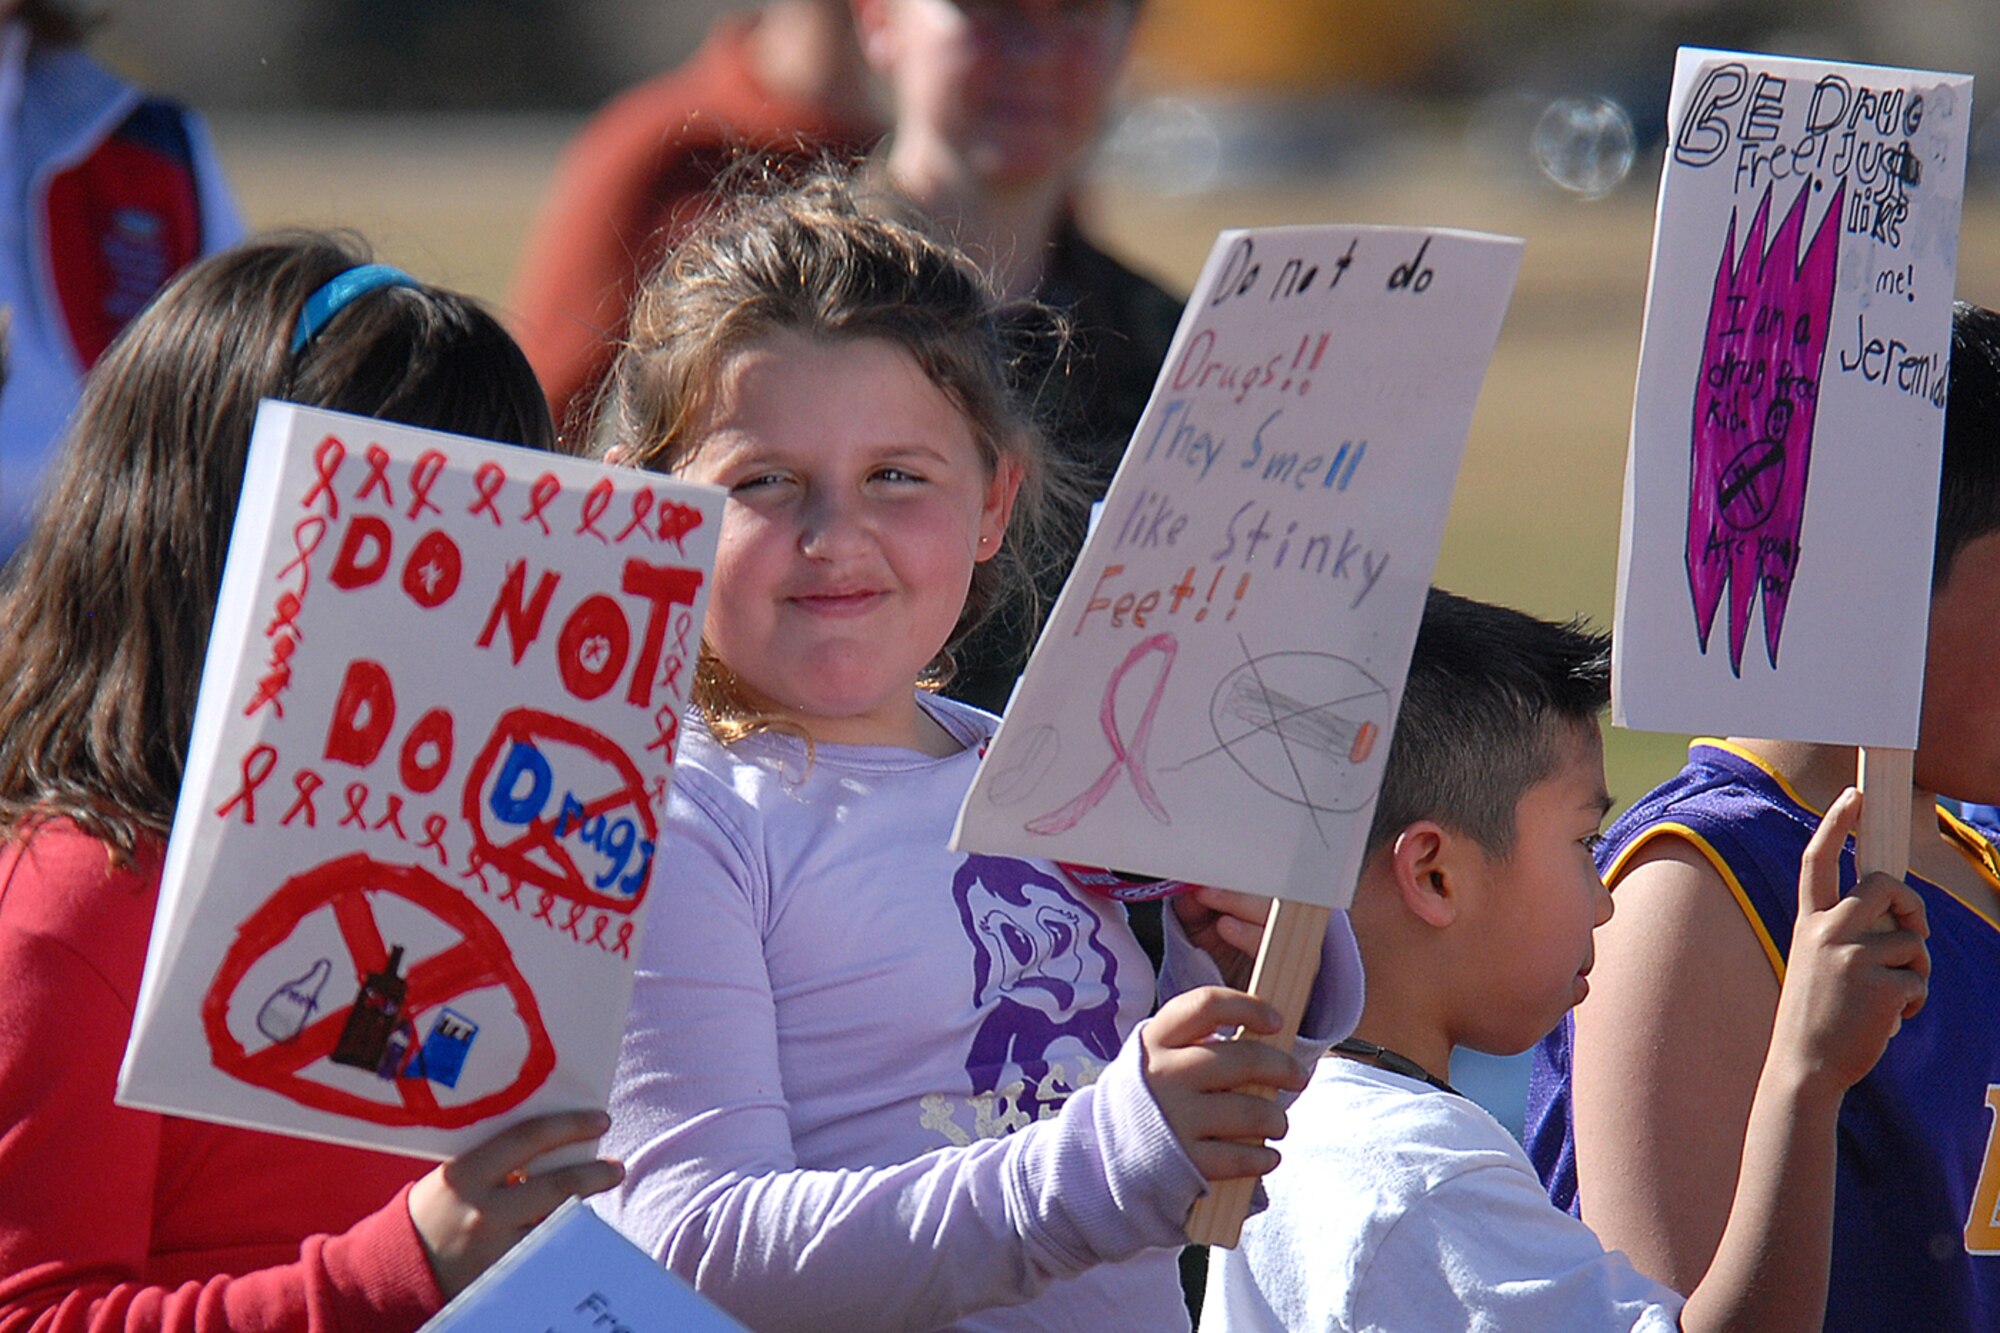 Children from Freedom Elementary School participate in the Red Ribbon Week parade Oct. 24 at Argonne Parade Field here. The children held signs with messages to don’t do drugs and marched around the field. Red Ribbon Week began to allow educators, parents, community groups and students nationwide to focus on the work being done to stop the spread of drugs and to pledge a drug-free life (Photos by Shelley Raffl).